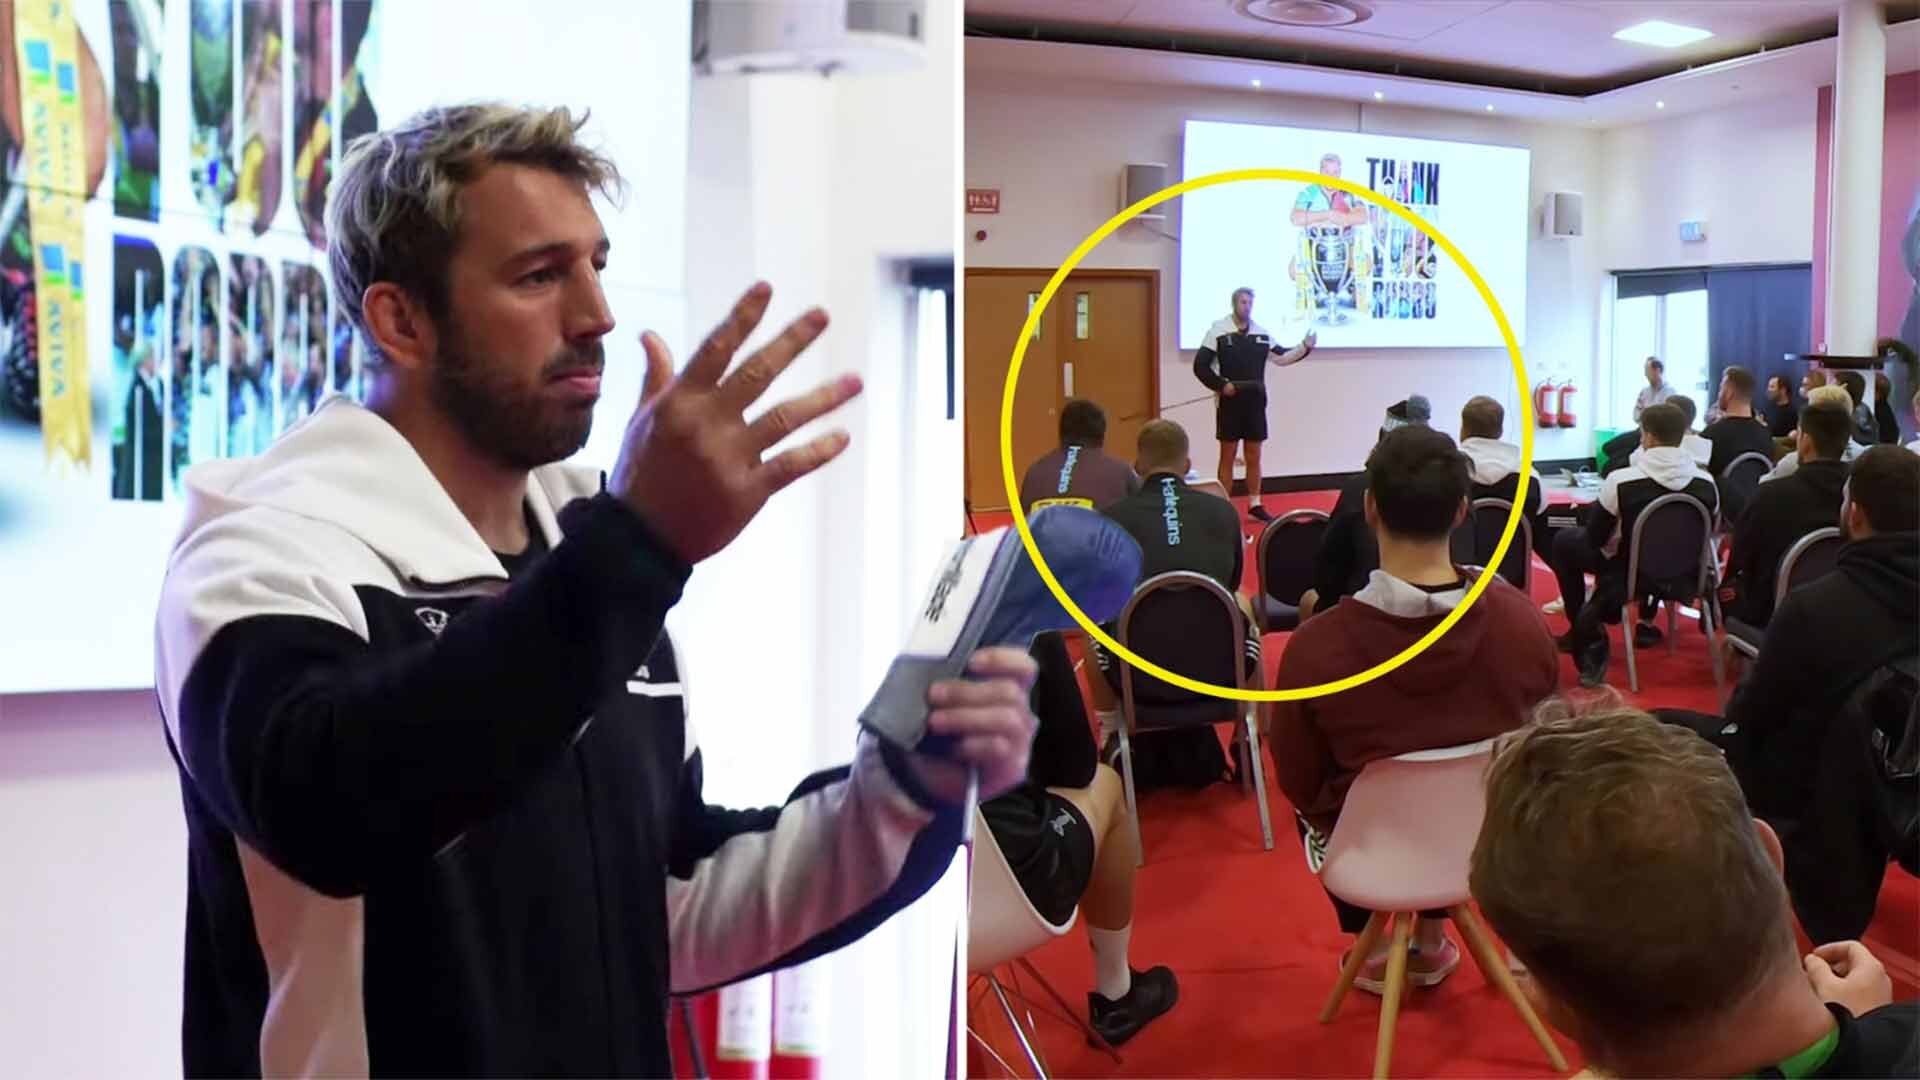 Chris Robshaw gave a final emotional speech to Harlequins before he left to play rugby in America